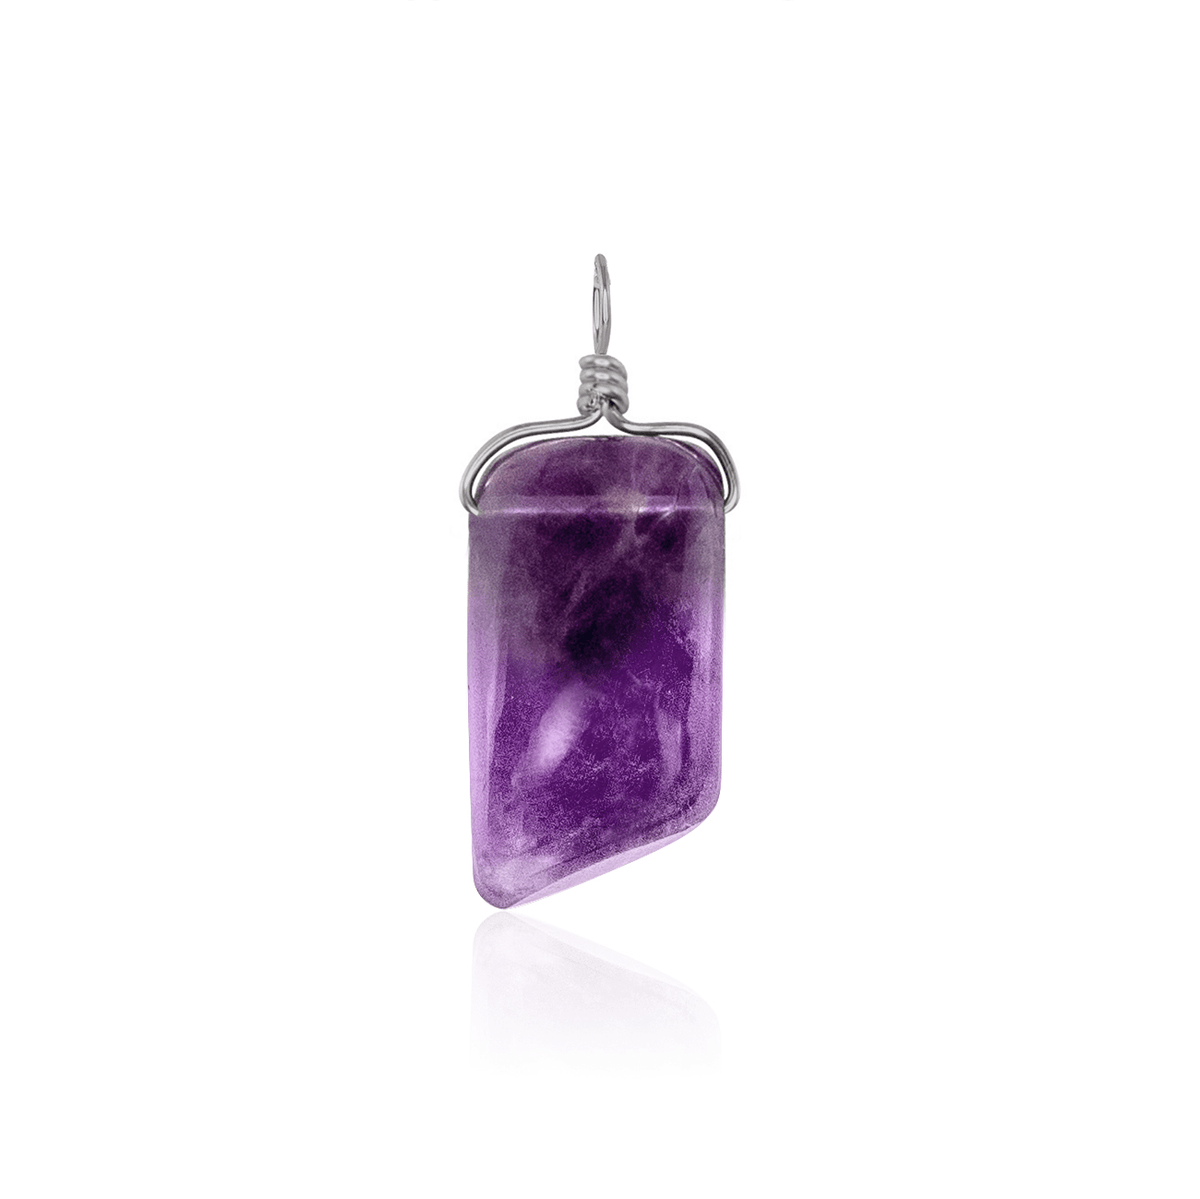 Small Smooth Amethyst Crystal Pendant with Gentle Point - Small Smooth Amethyst Crystal Pendant with Gentle Point - Stainless Steel - Luna Tide Handmade Crystal Jewellery